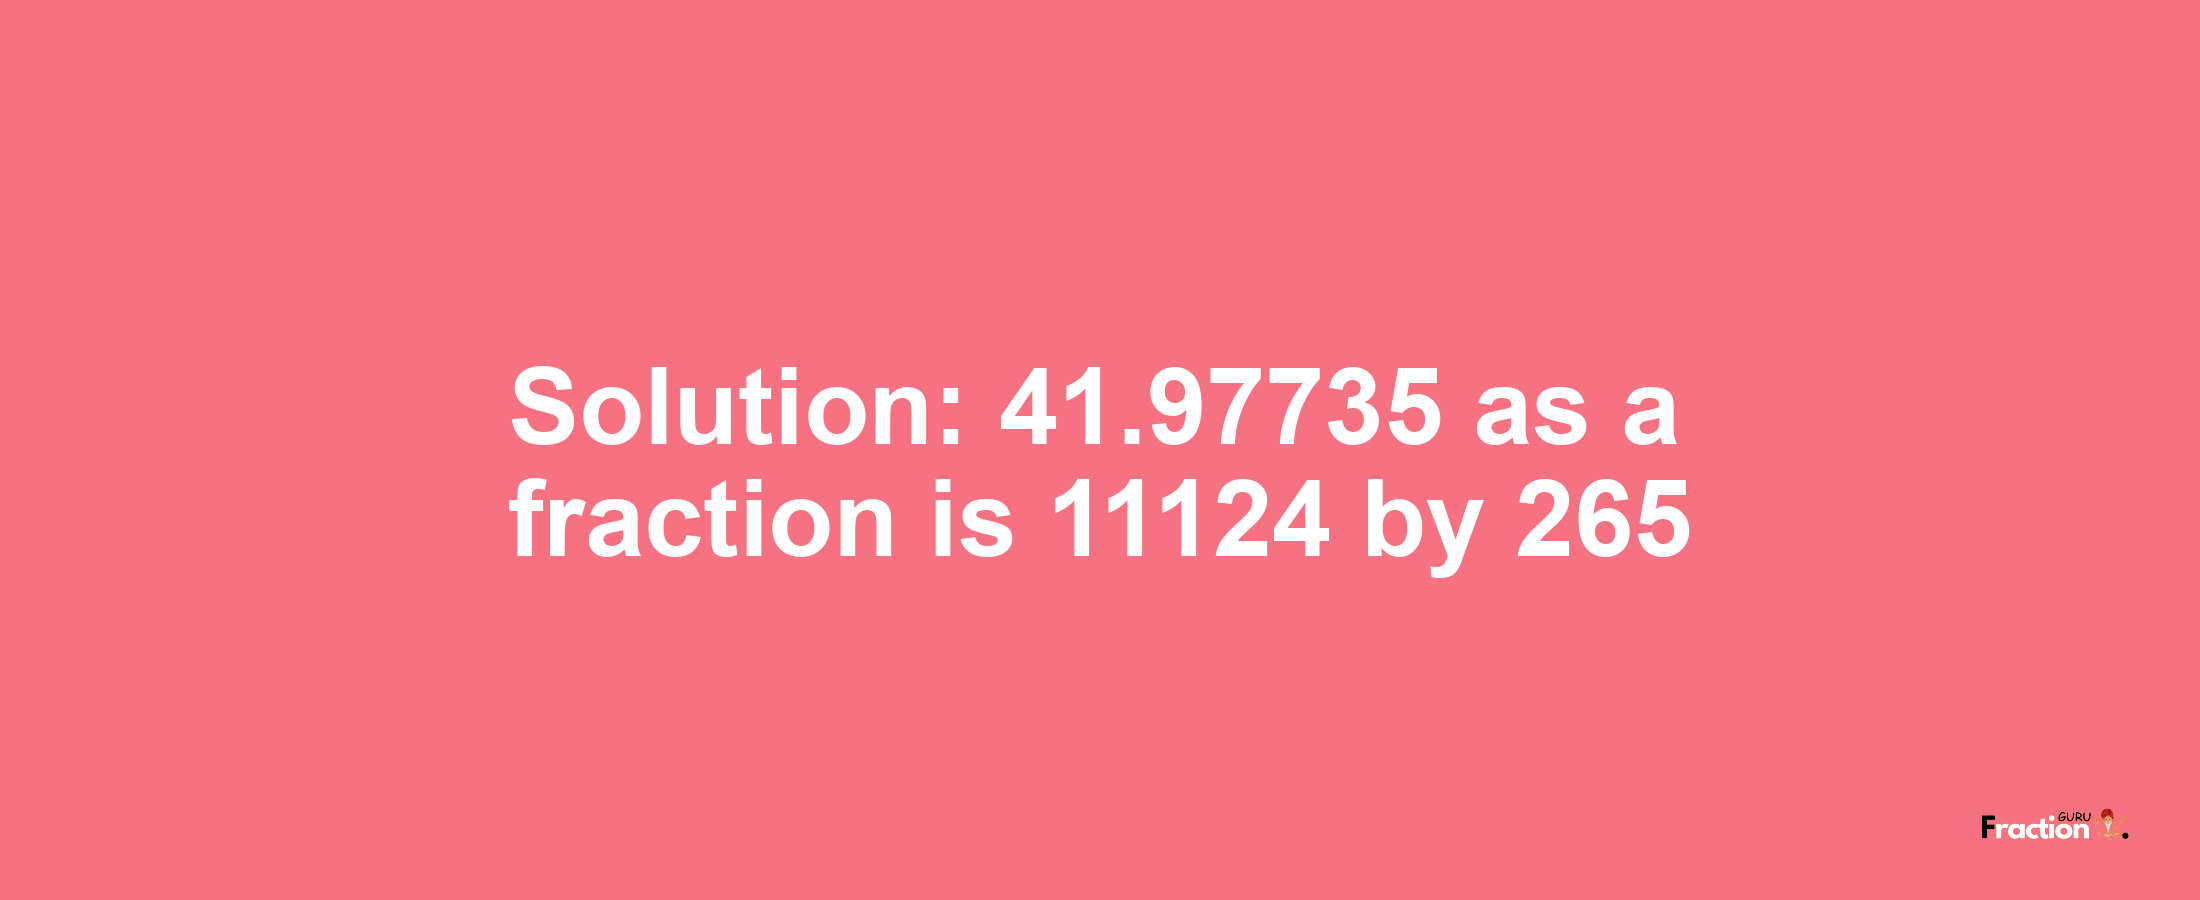 Solution:41.97735 as a fraction is 11124/265